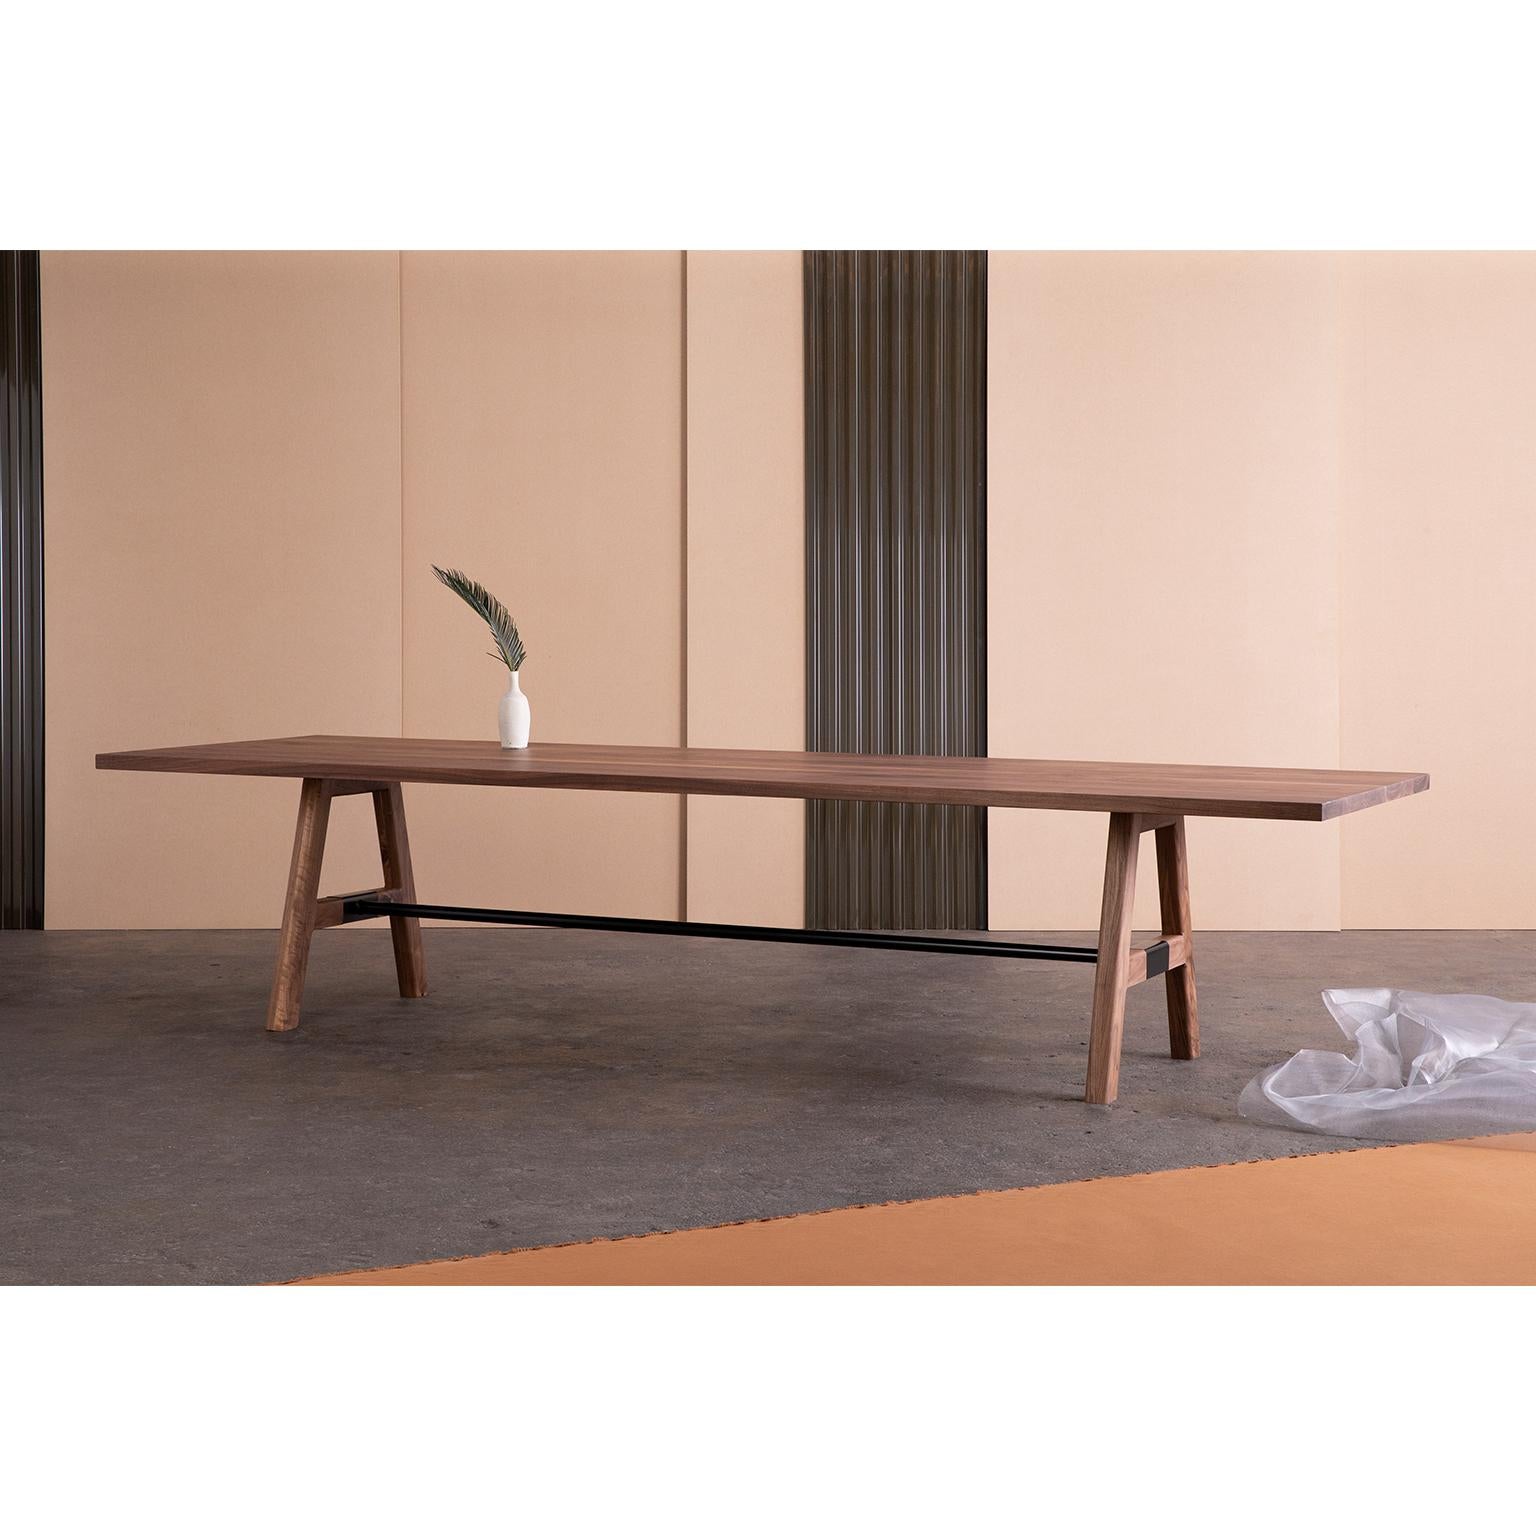 The A-Frame conference table has all of the characters of a handmade piece of furniture but with a refinement you can only find from skilled craftsmanship. The table’s Dual purpose metal stretcher adds extra support to the frame while giving it a